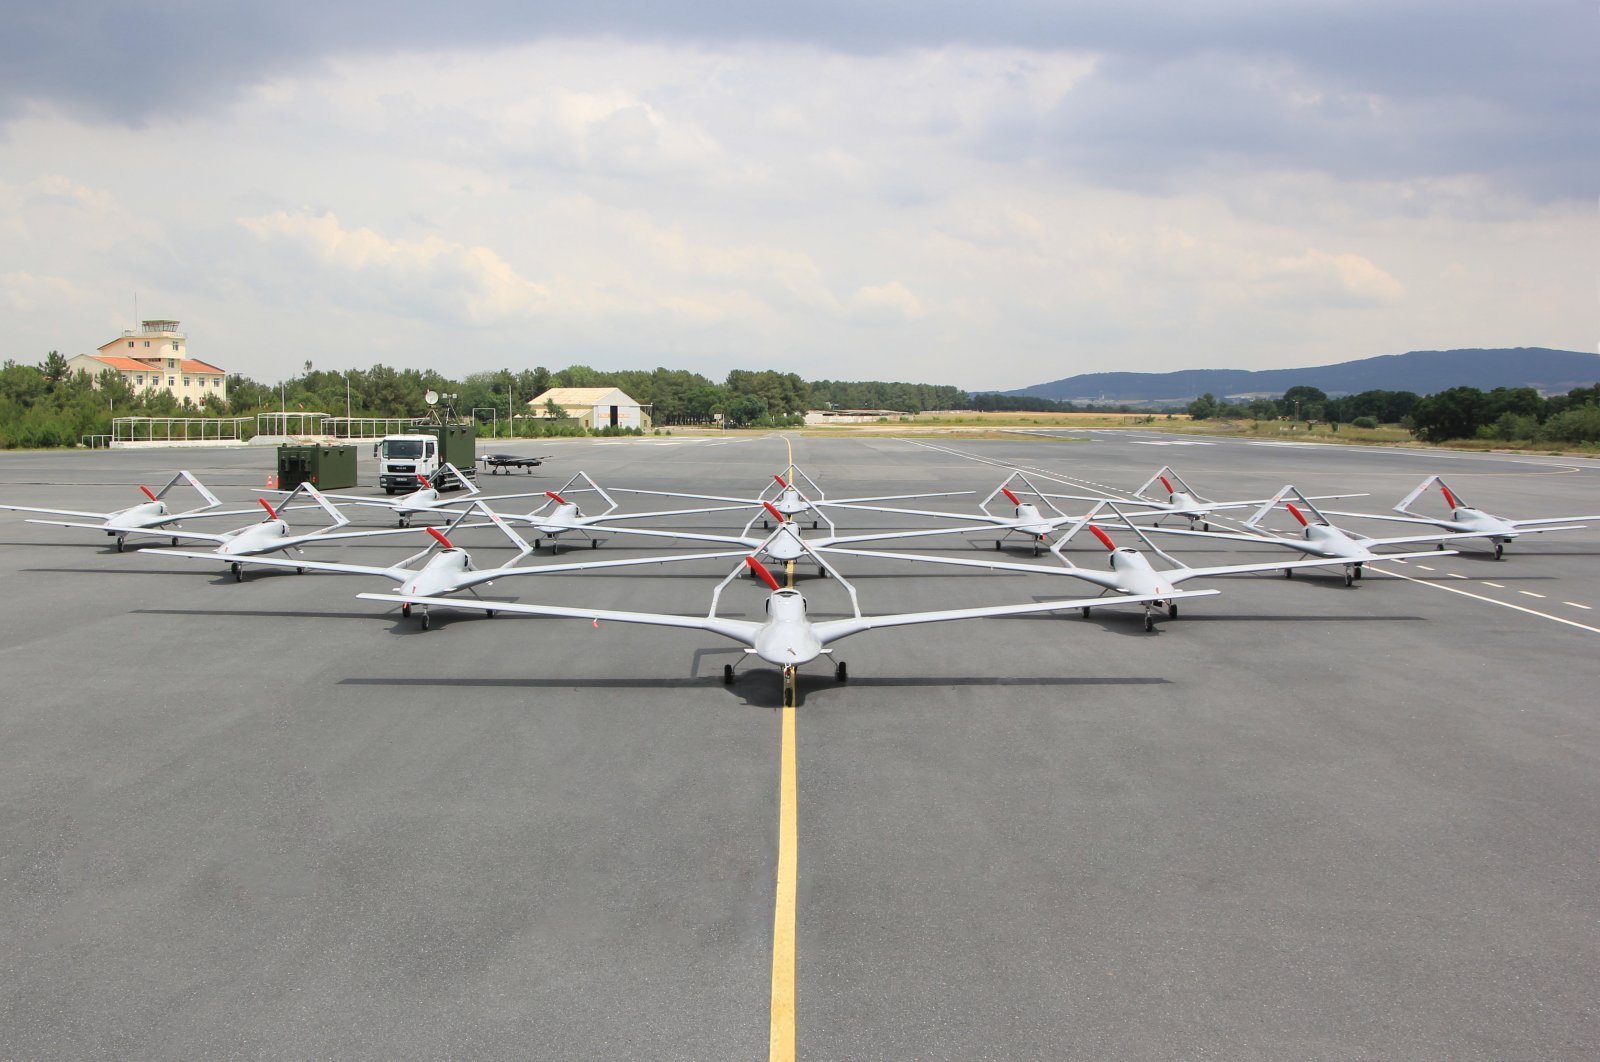 Bayraktar TB2 unmanned aerial vehicles (UAVs) are seen parked at an airfield in Istanbul, June 11, 2020. (AA Photo)